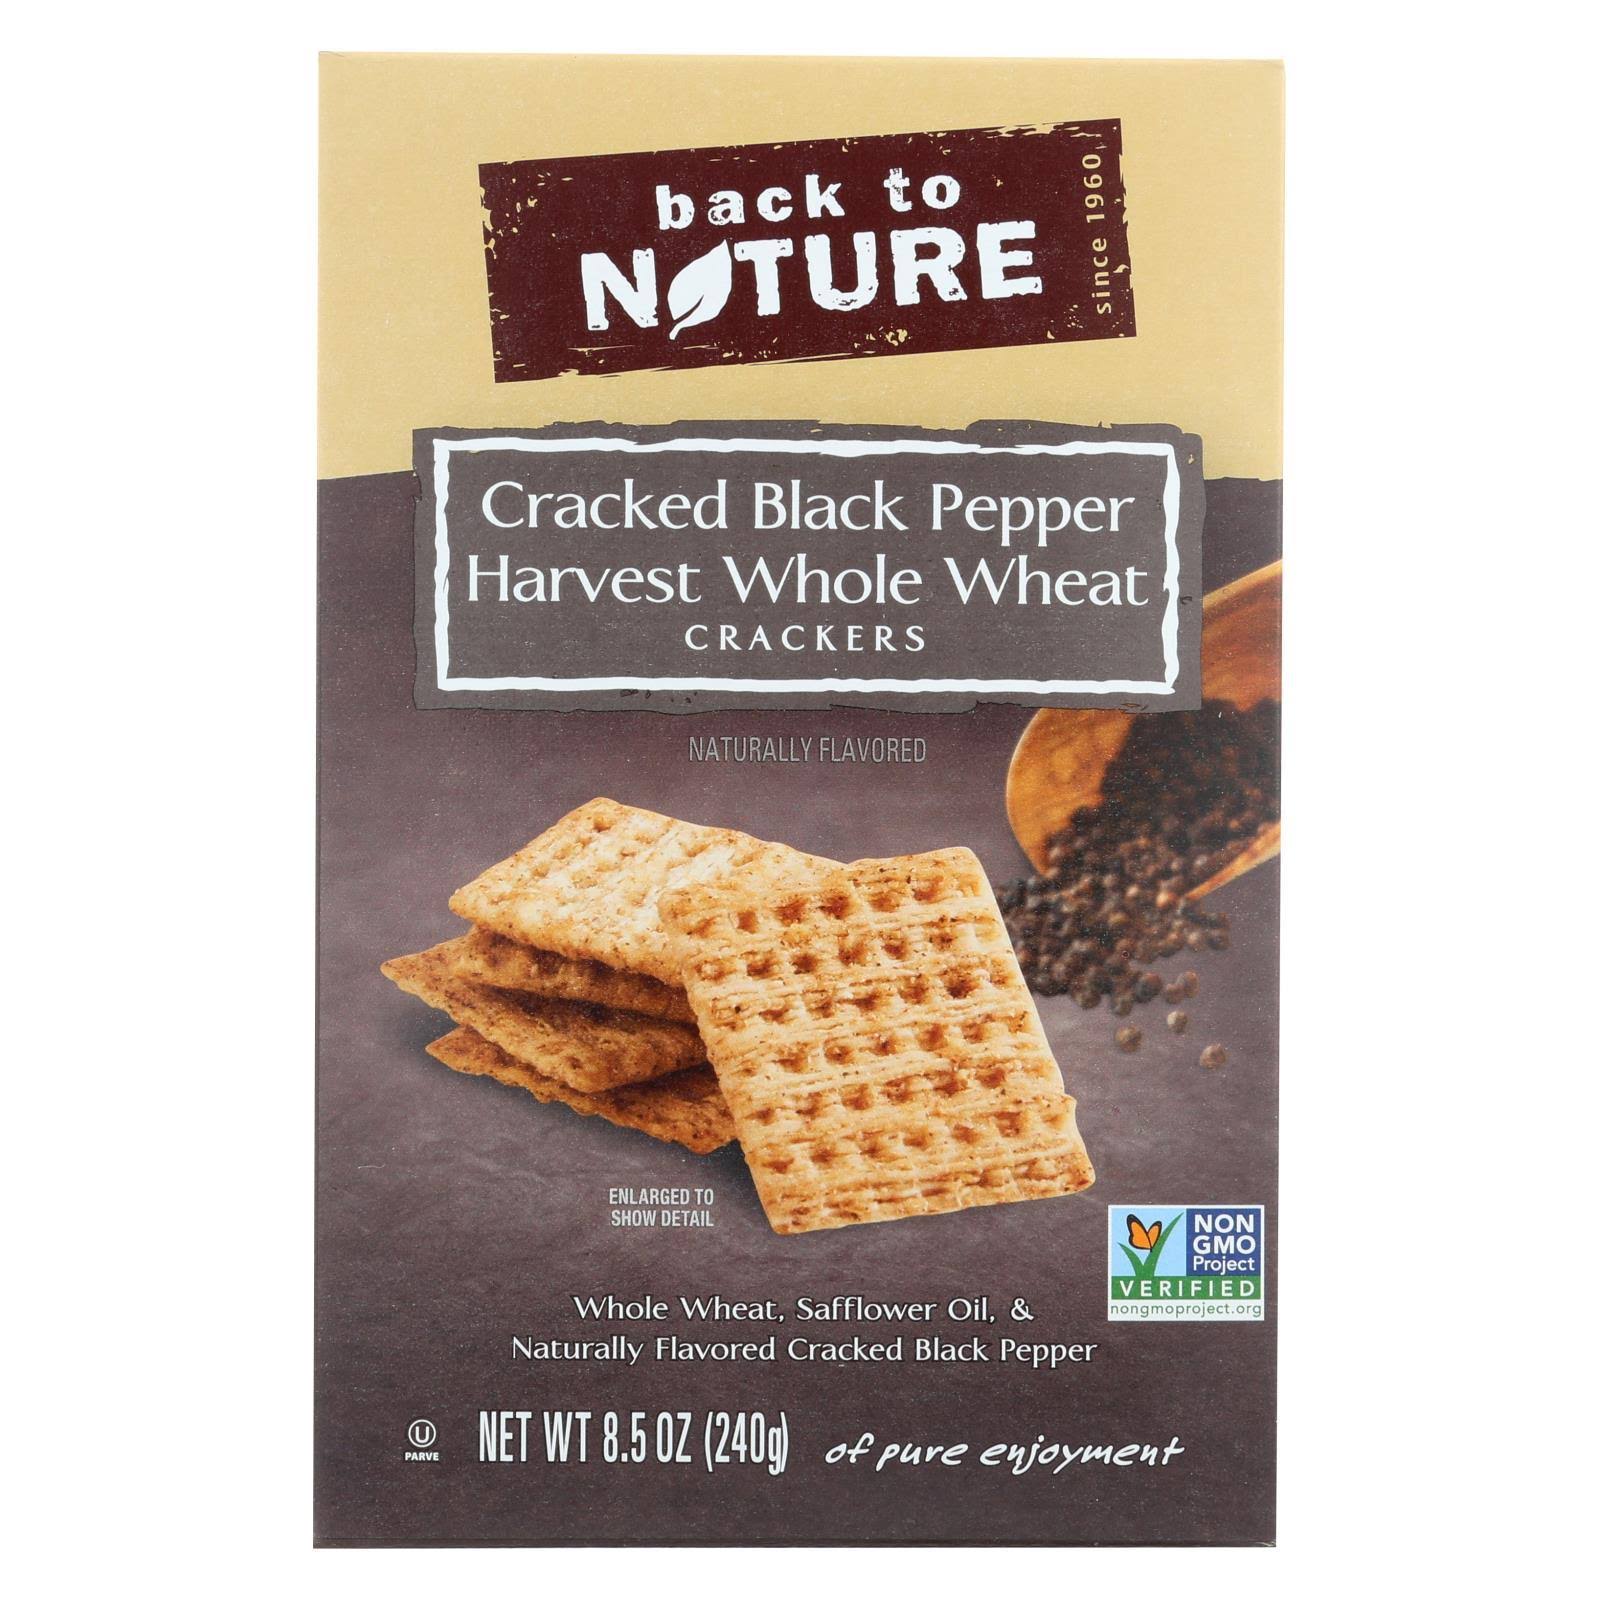 Back To Nature 2036309 8.5 oz Whole Wheat Black Pepper Crackers - Case of 12